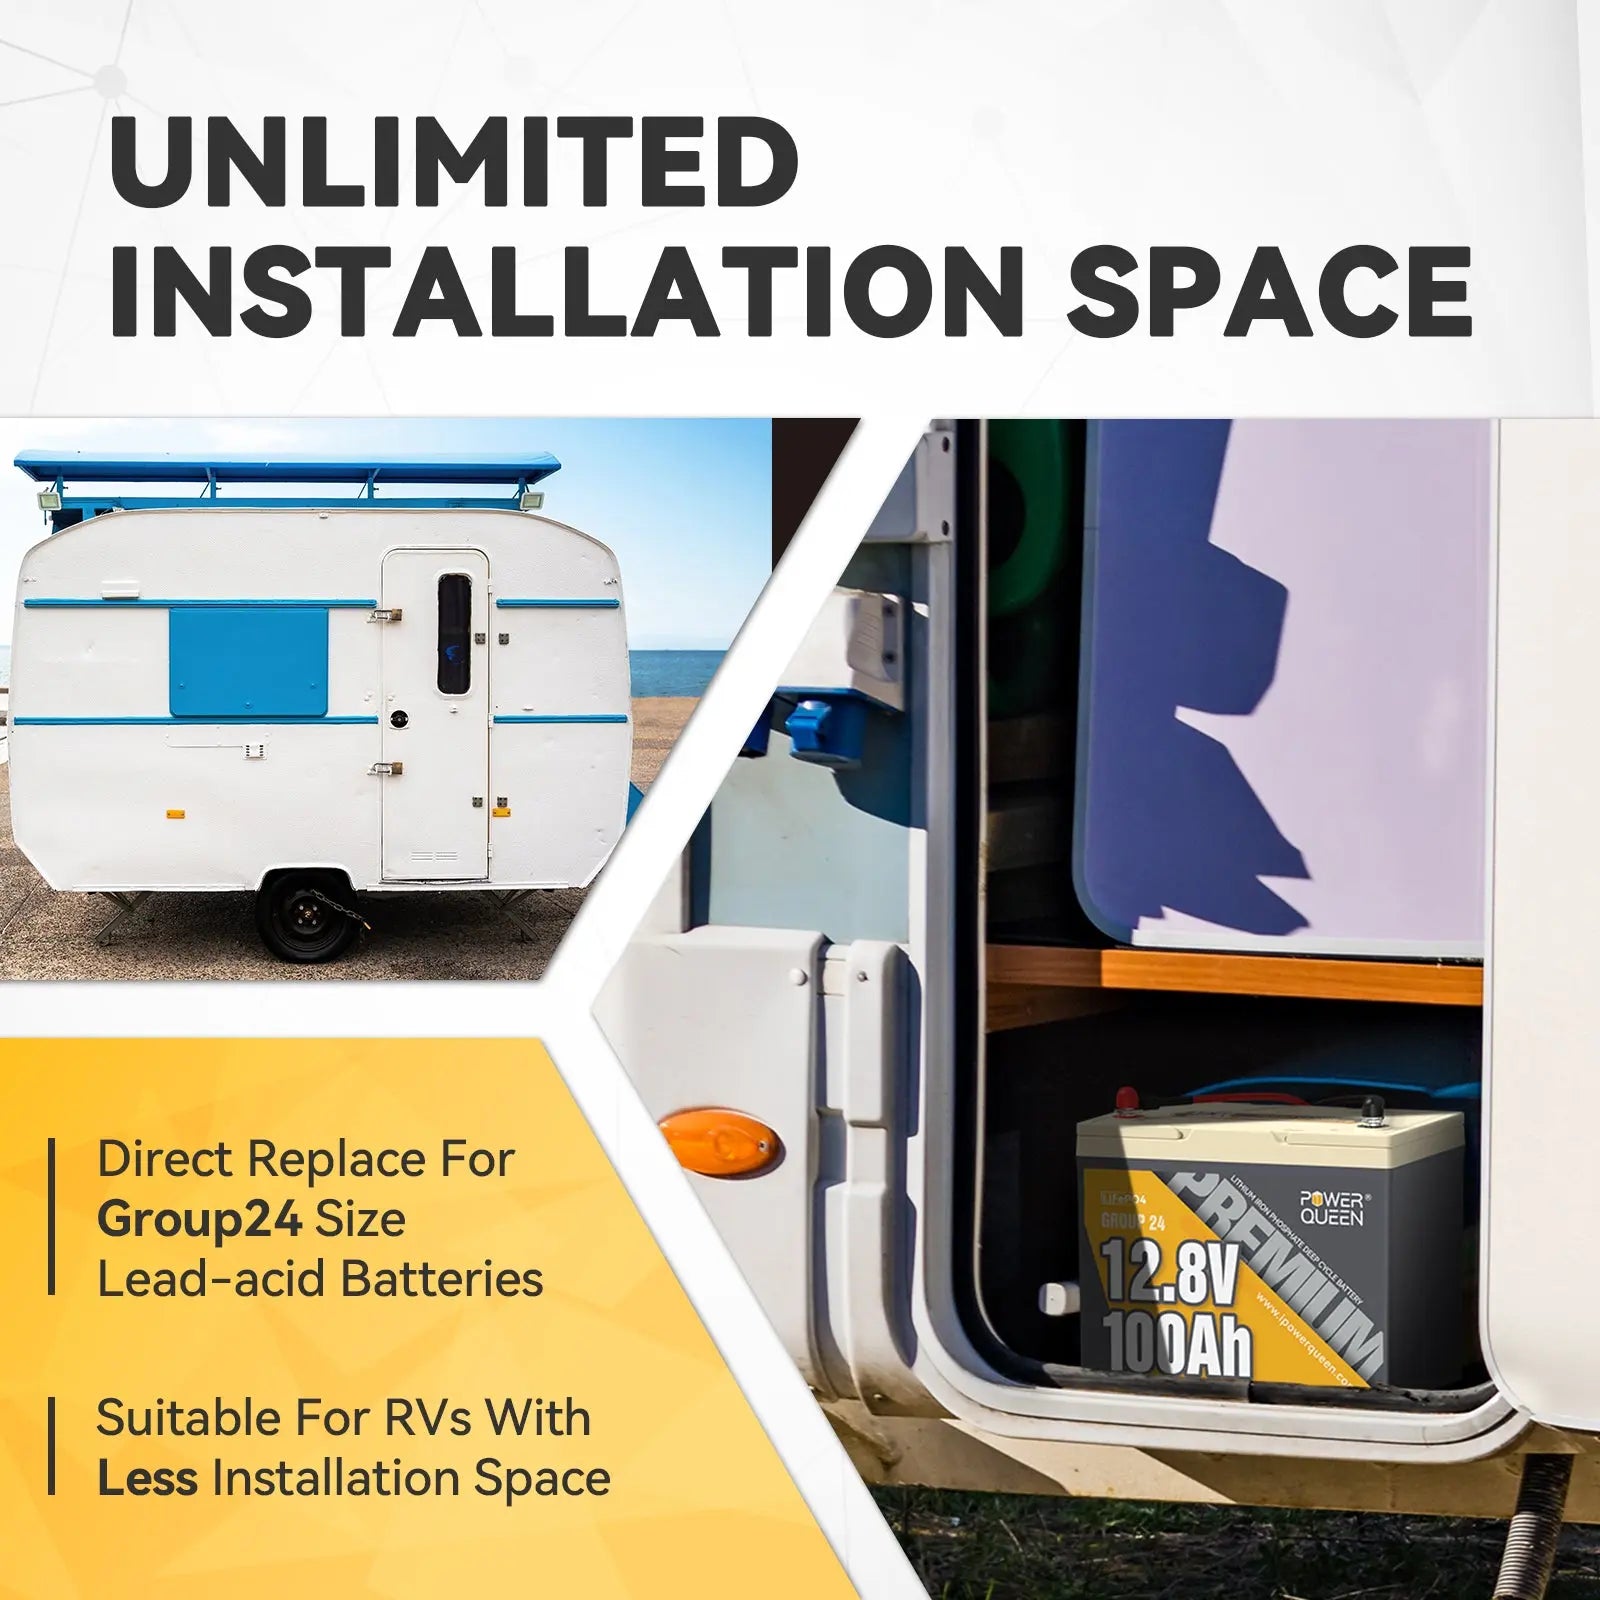 Group24 size suitable for RVs with less installation space